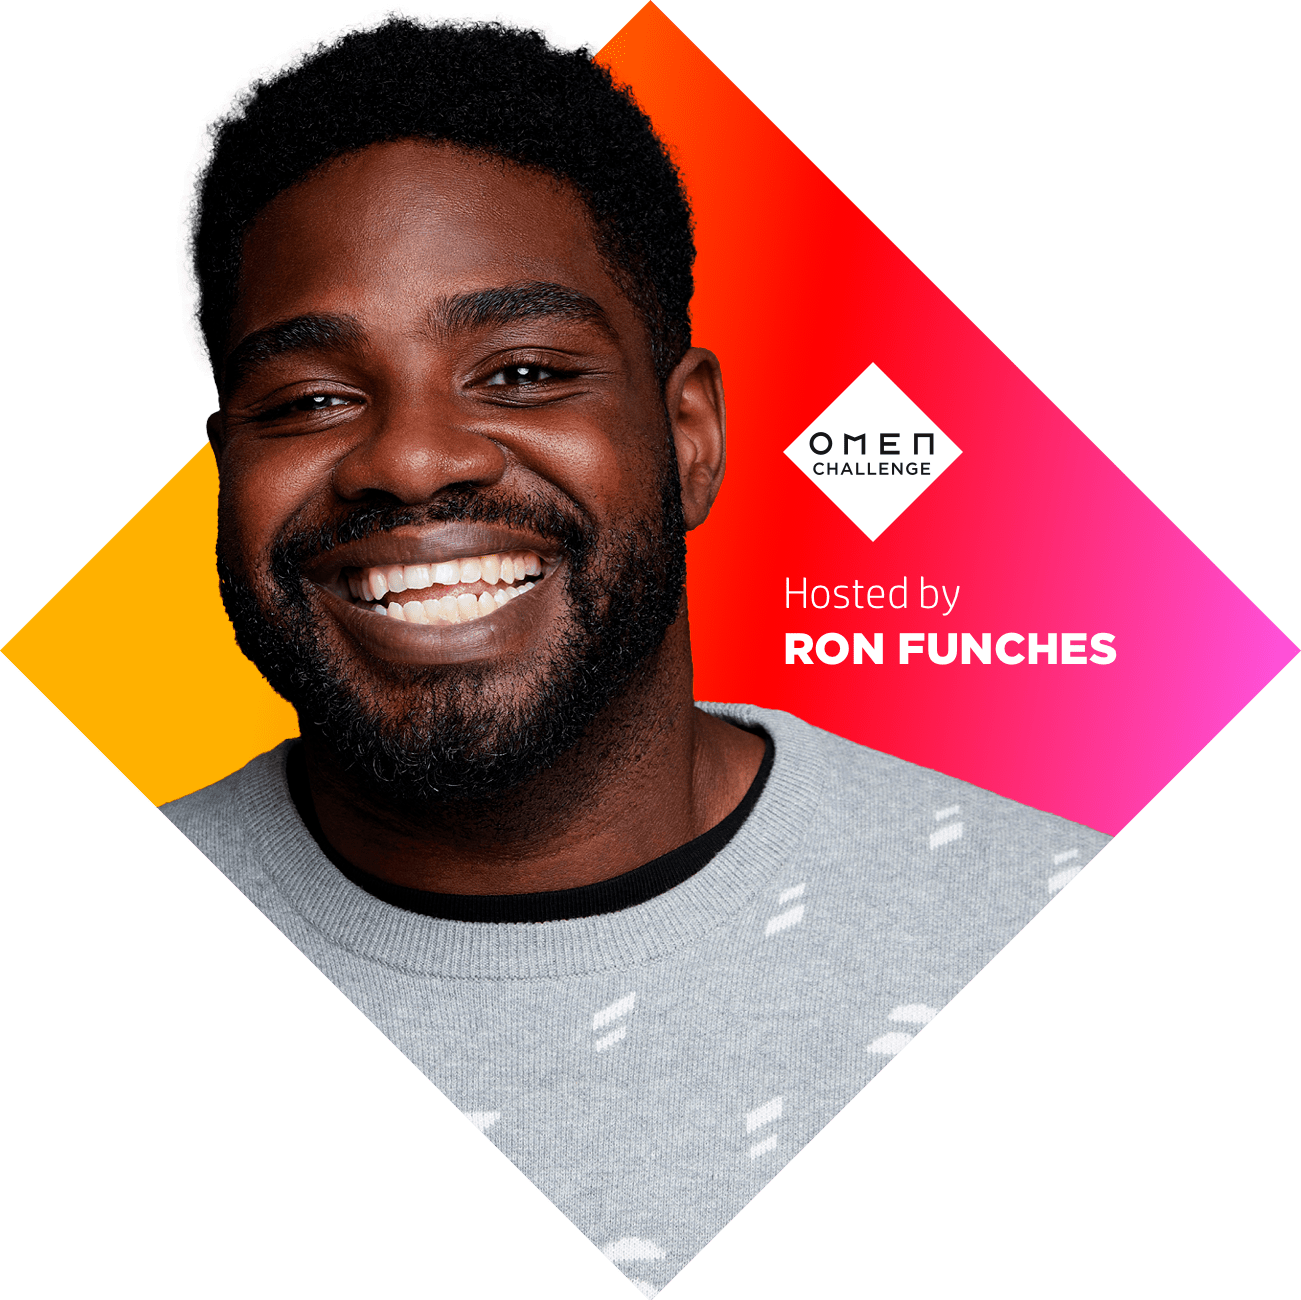 Host and Comedian Ron Funches